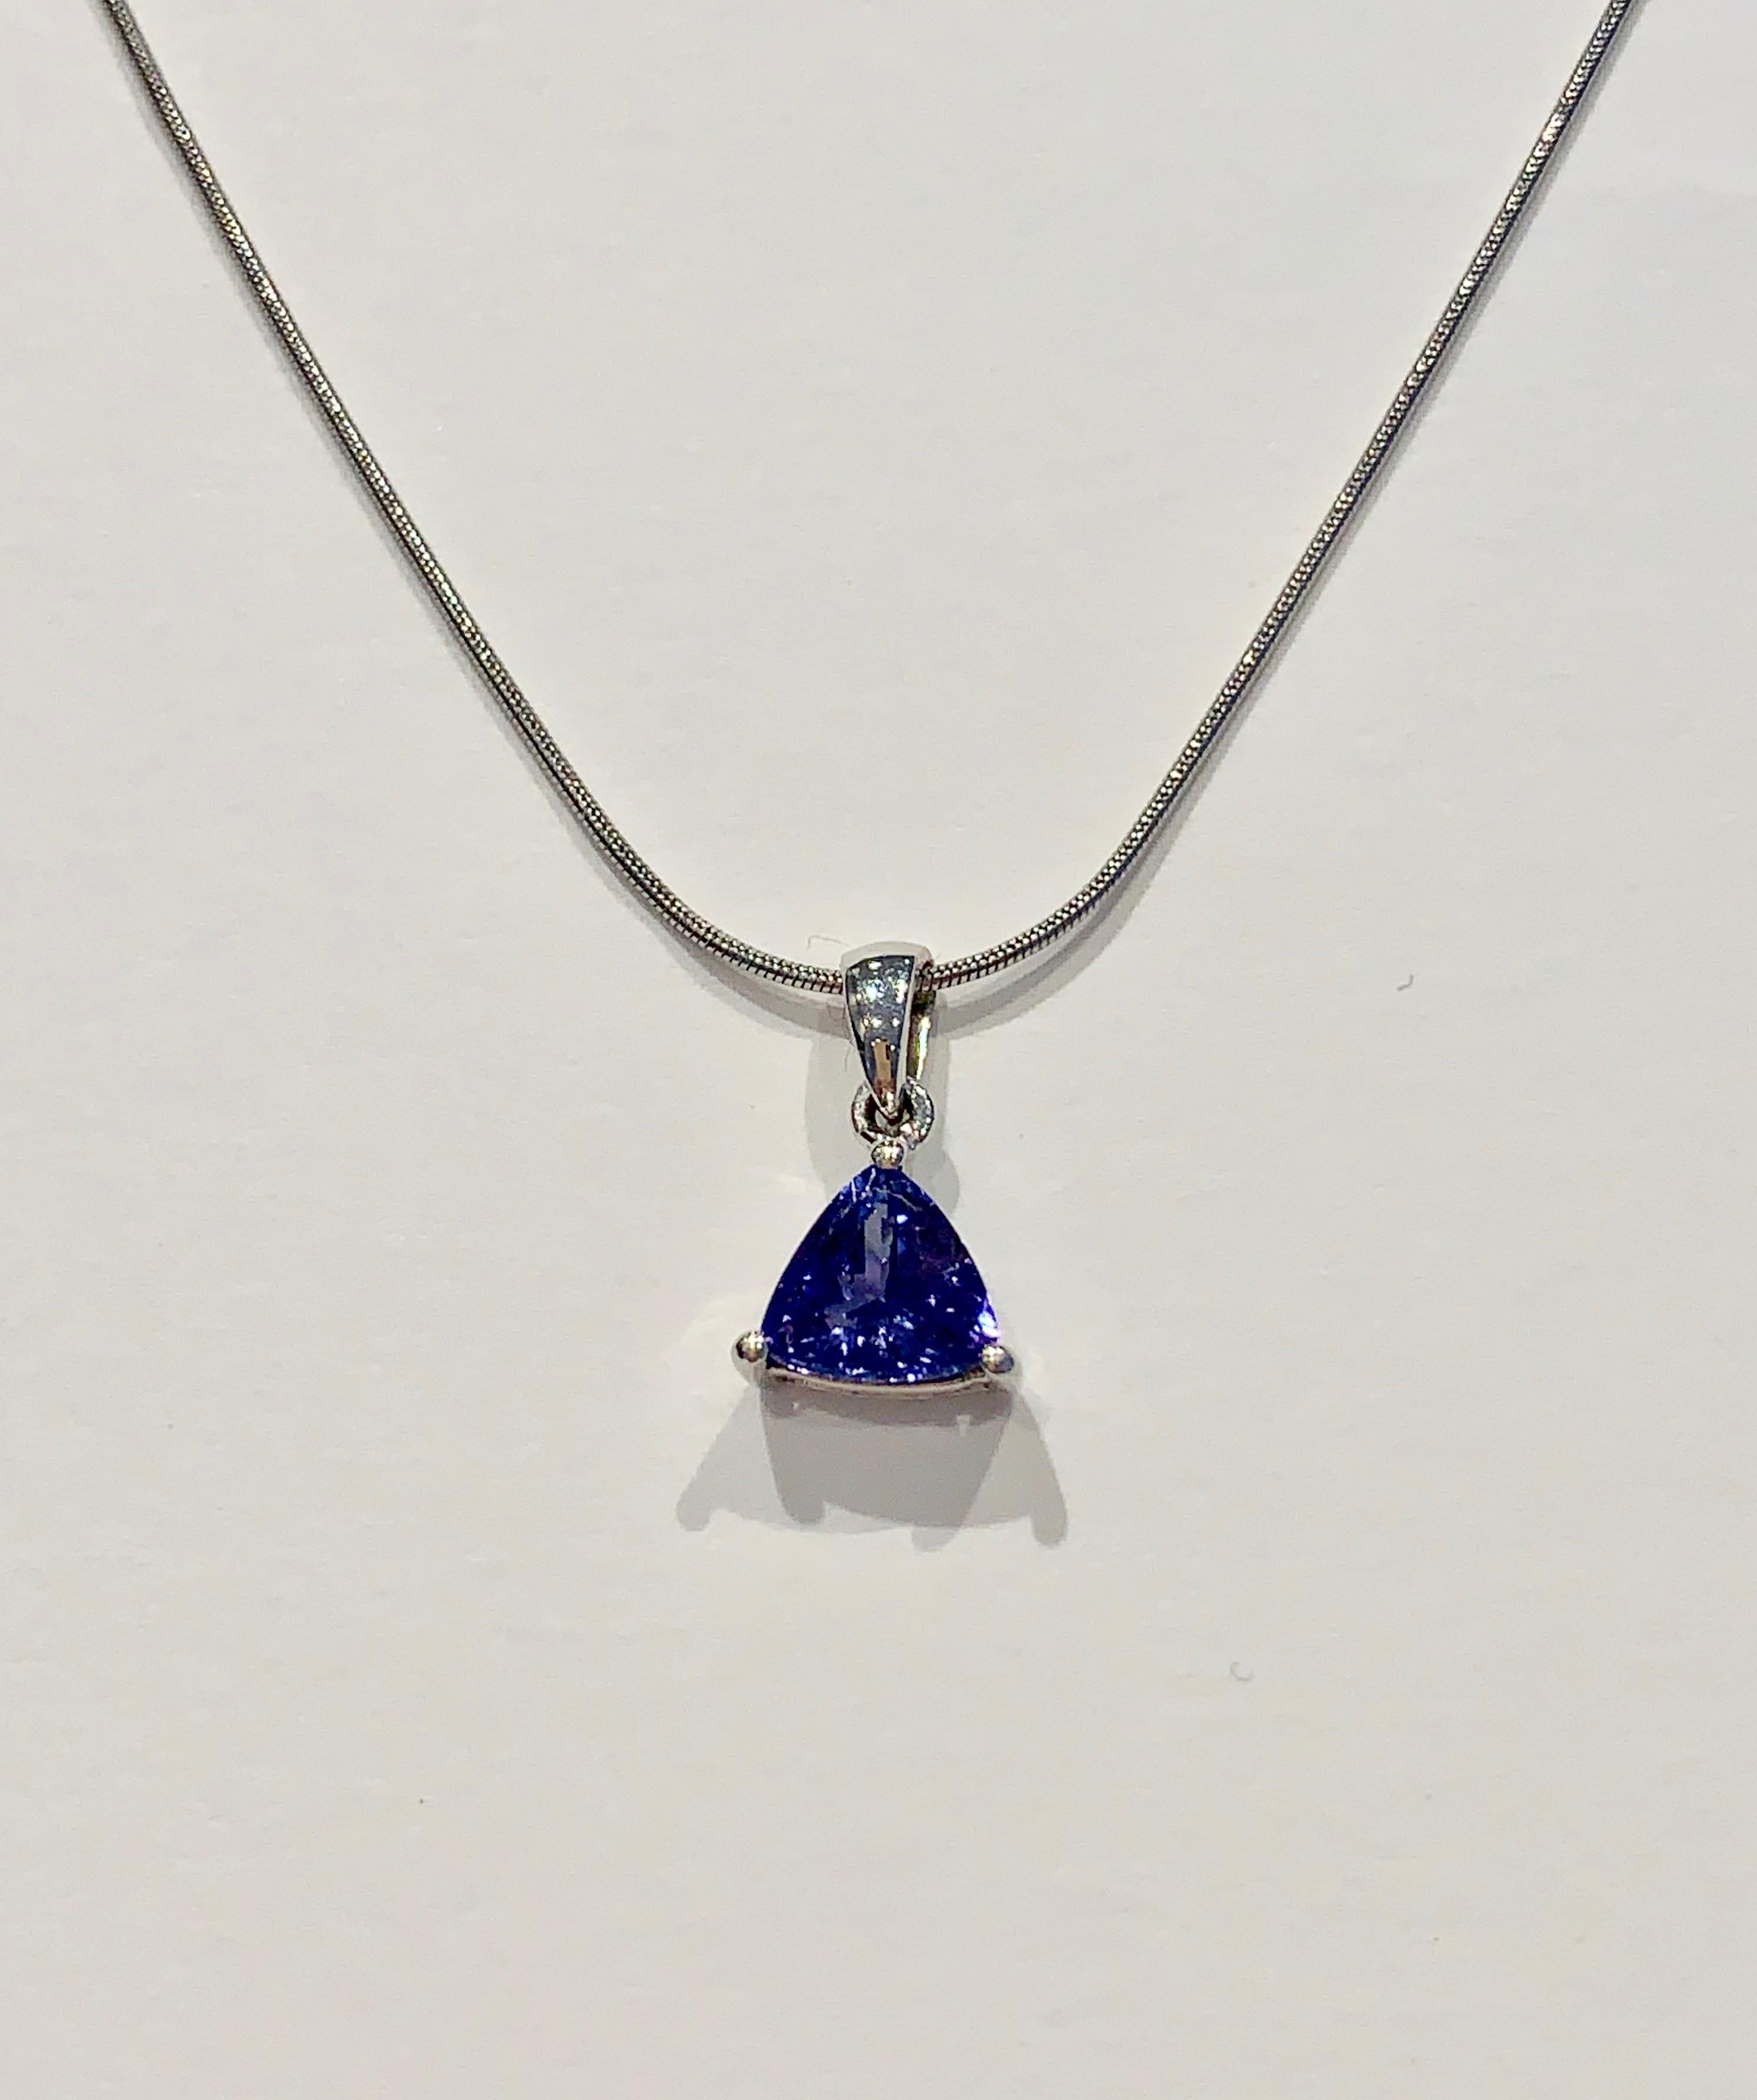 This delicate Pendant has a pretty blue Trillion cut Tanzanite stone set in 18ct White Gold.  The Tanzanite has wonderful clarity and sparkle.  The stone measures 7  x 7 mm and is presented on an 18 inch White Gold Snake Chain. 

The chain has a